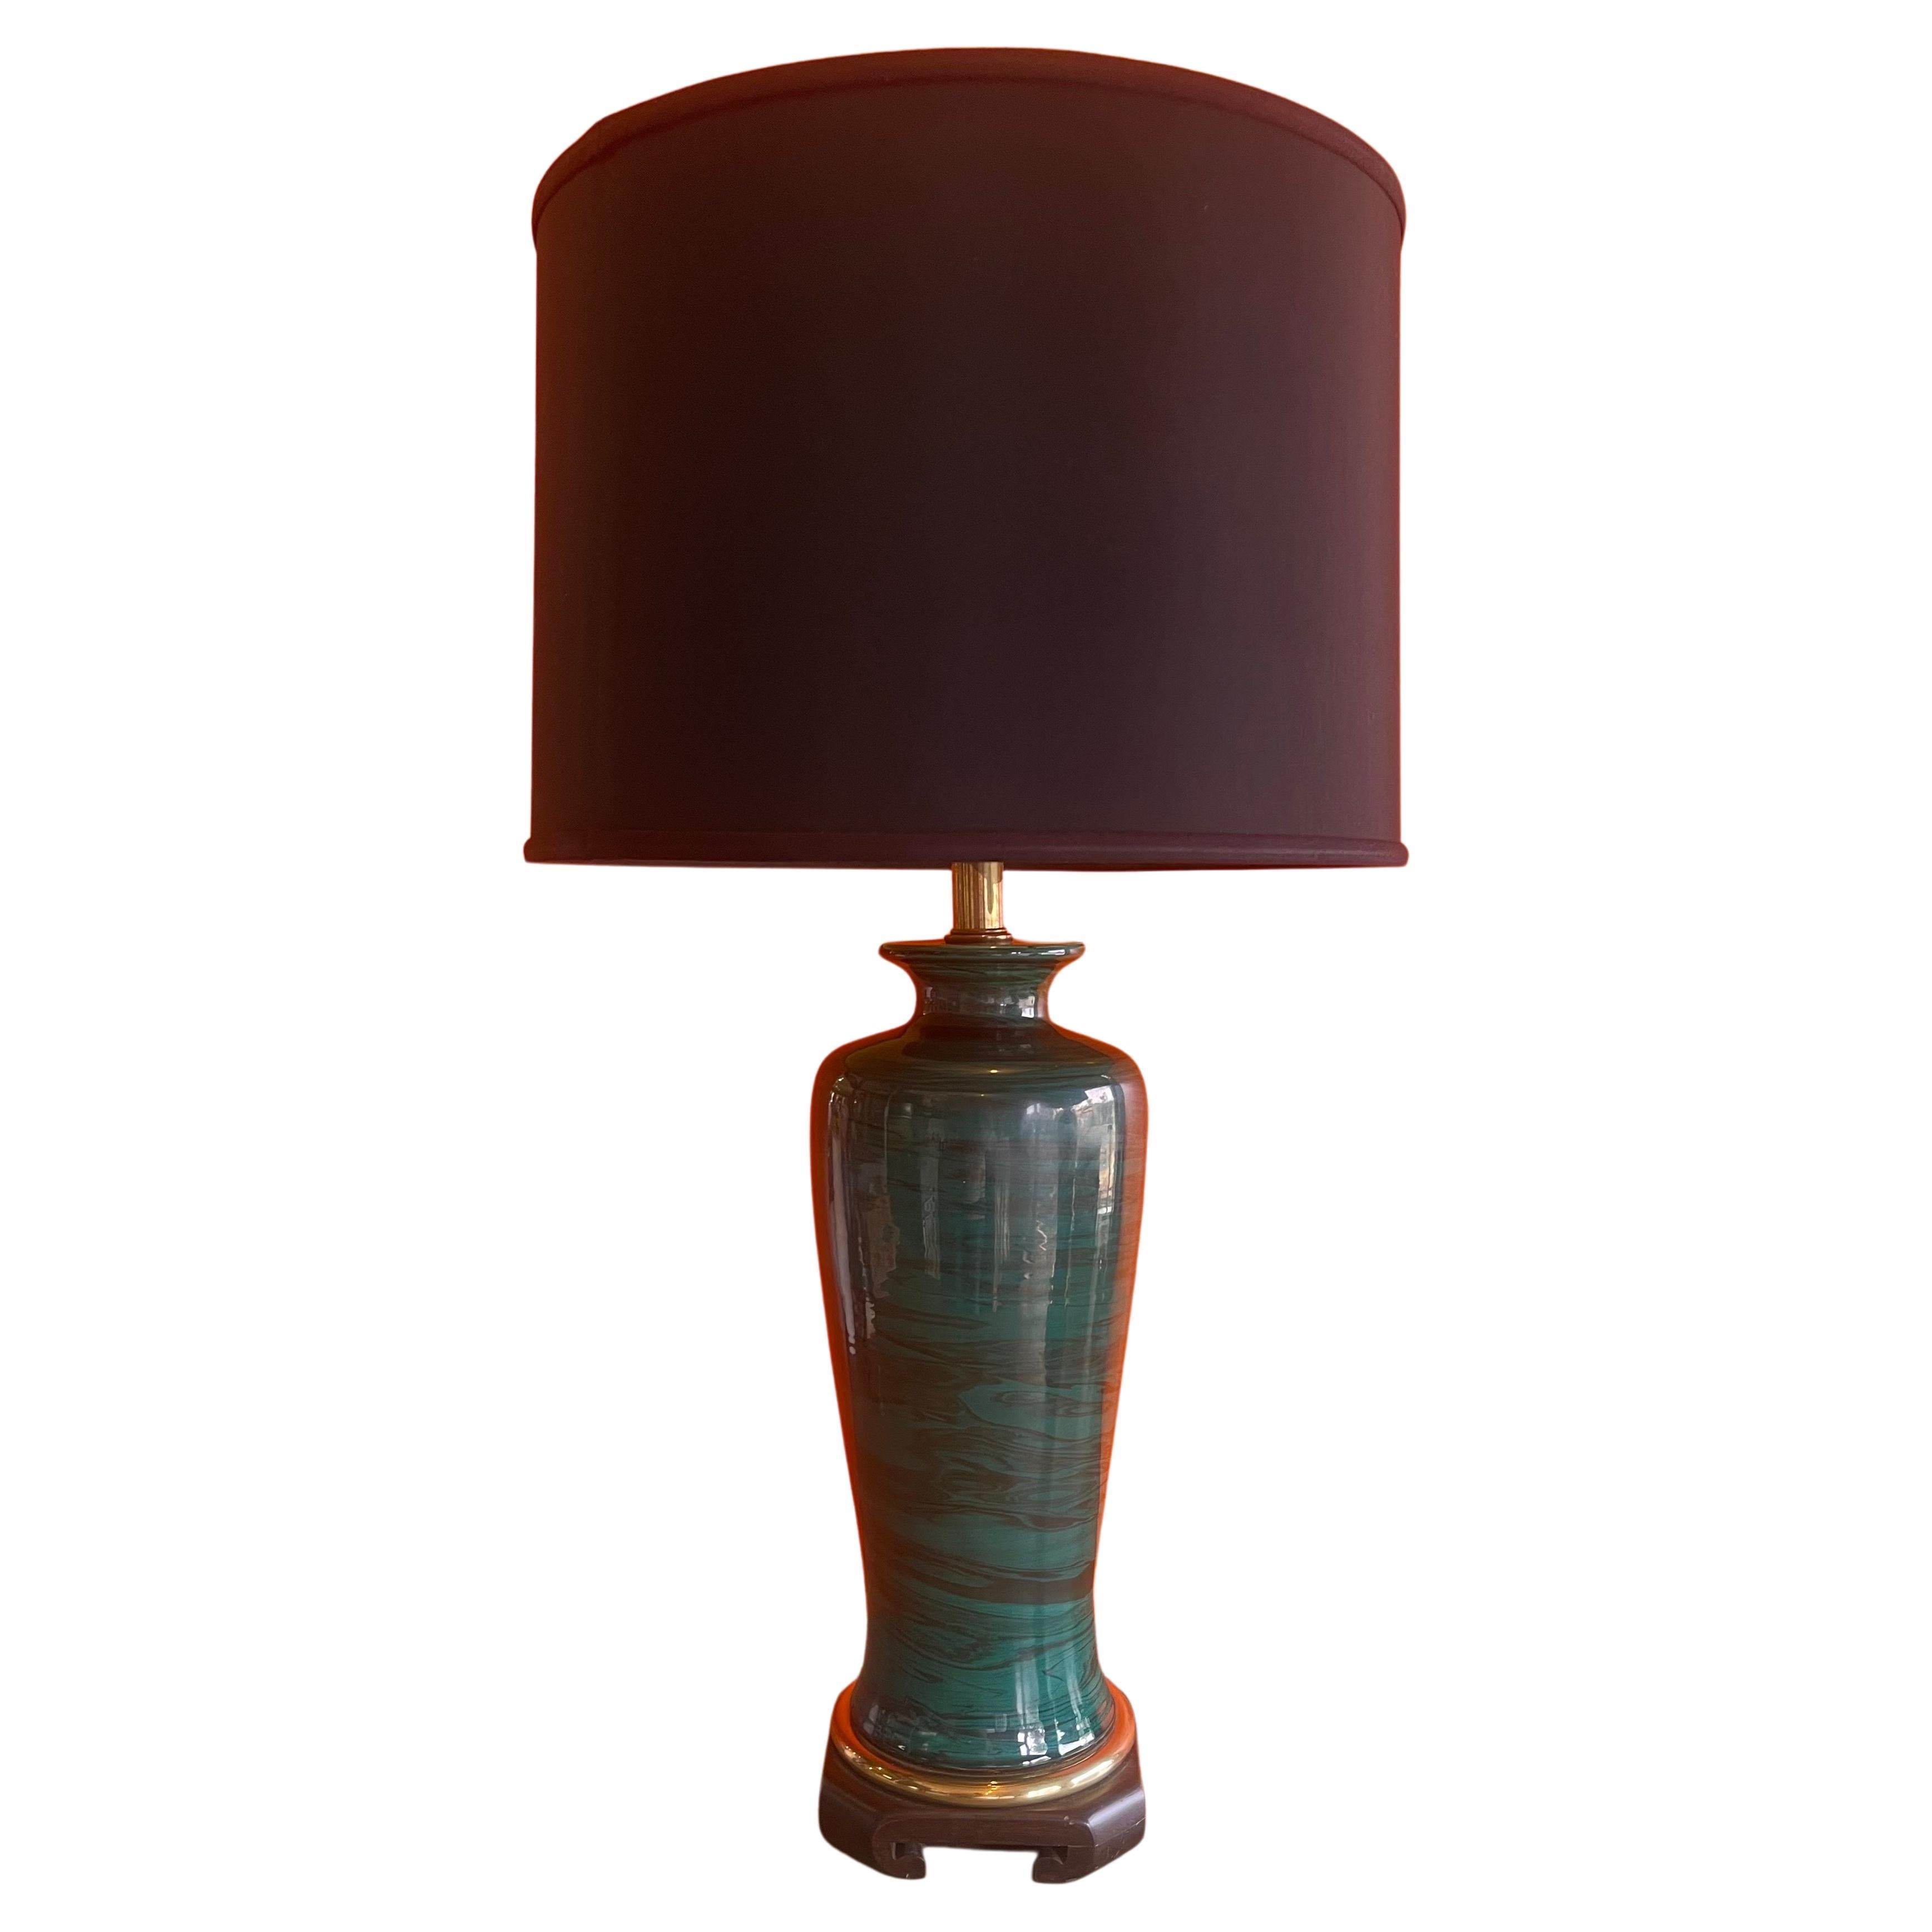 Gorgeous pair of faux malachite table lamps with black silk drum shades by Frederick Cooper Lamp Co. of Chicago, circa 1970s. With a definite Asian aesthetic, lamp features a wavy teal and green porcelain shaped ginger jar vessel with a beautiful